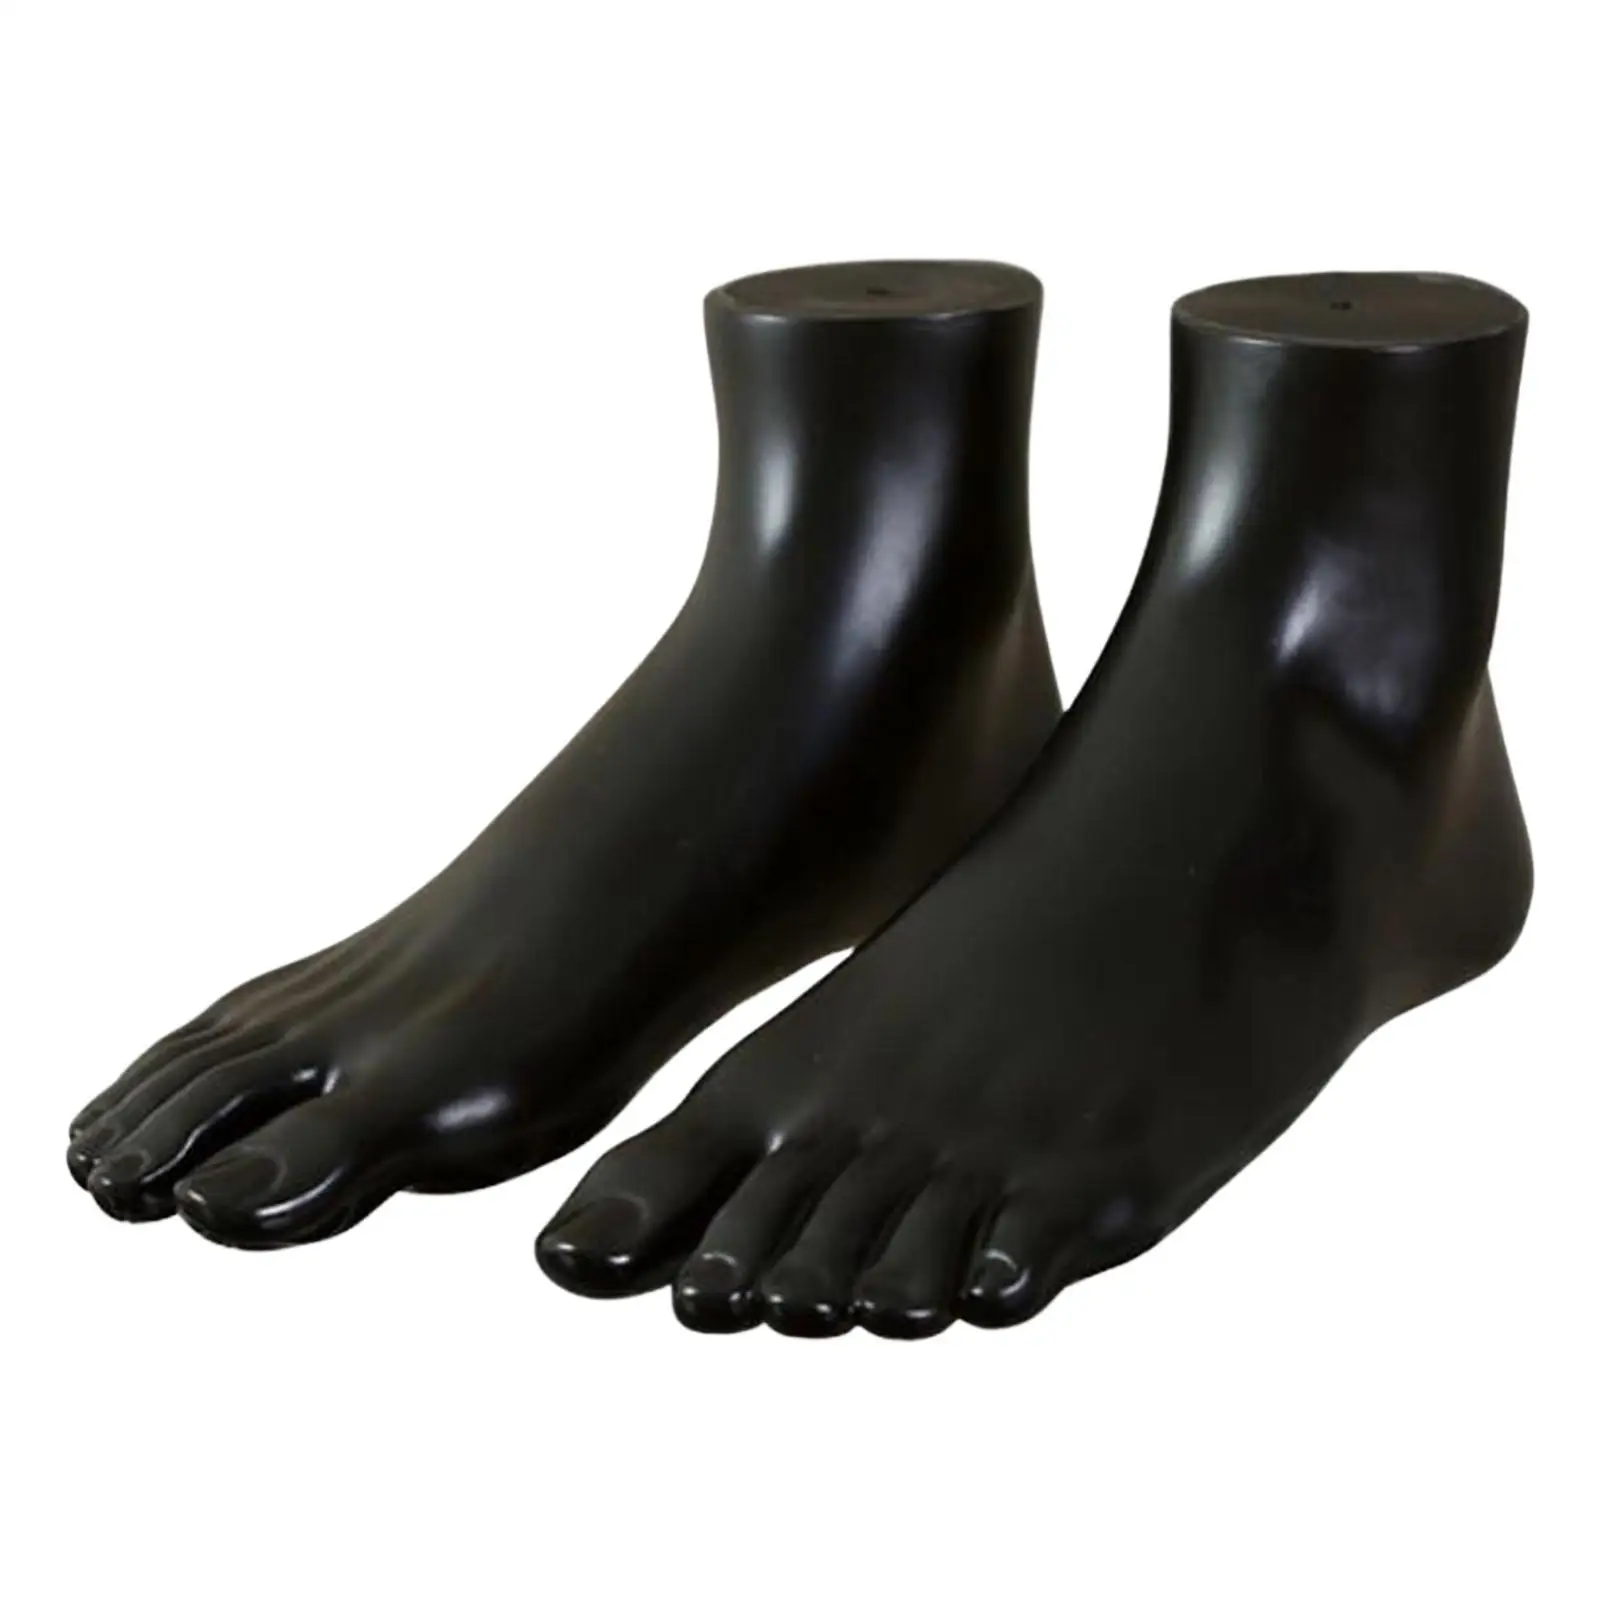 A Pair Mannequin Adult Feet Women Shoes Feet Model for Short Stocking Shop